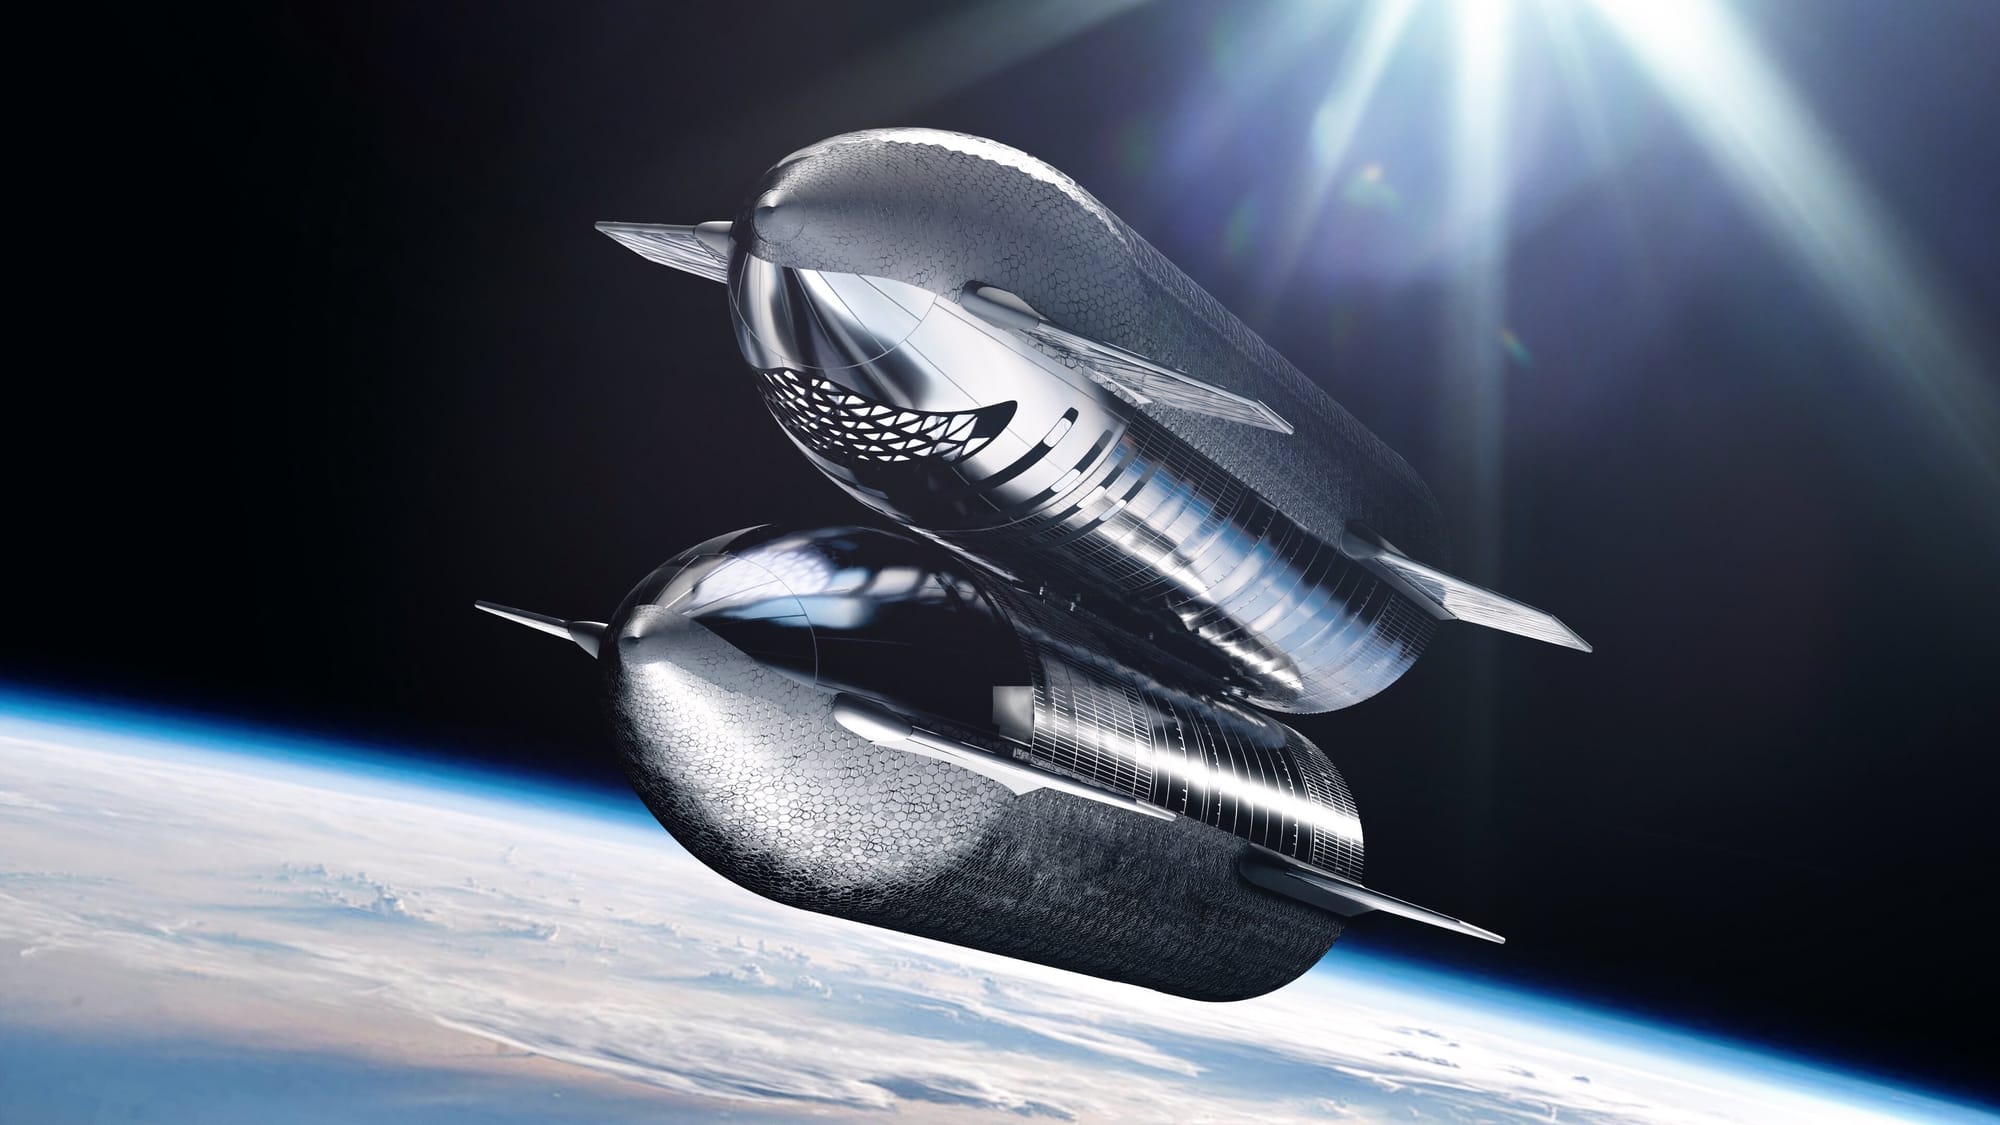 SpaceX starship traveling above earth.